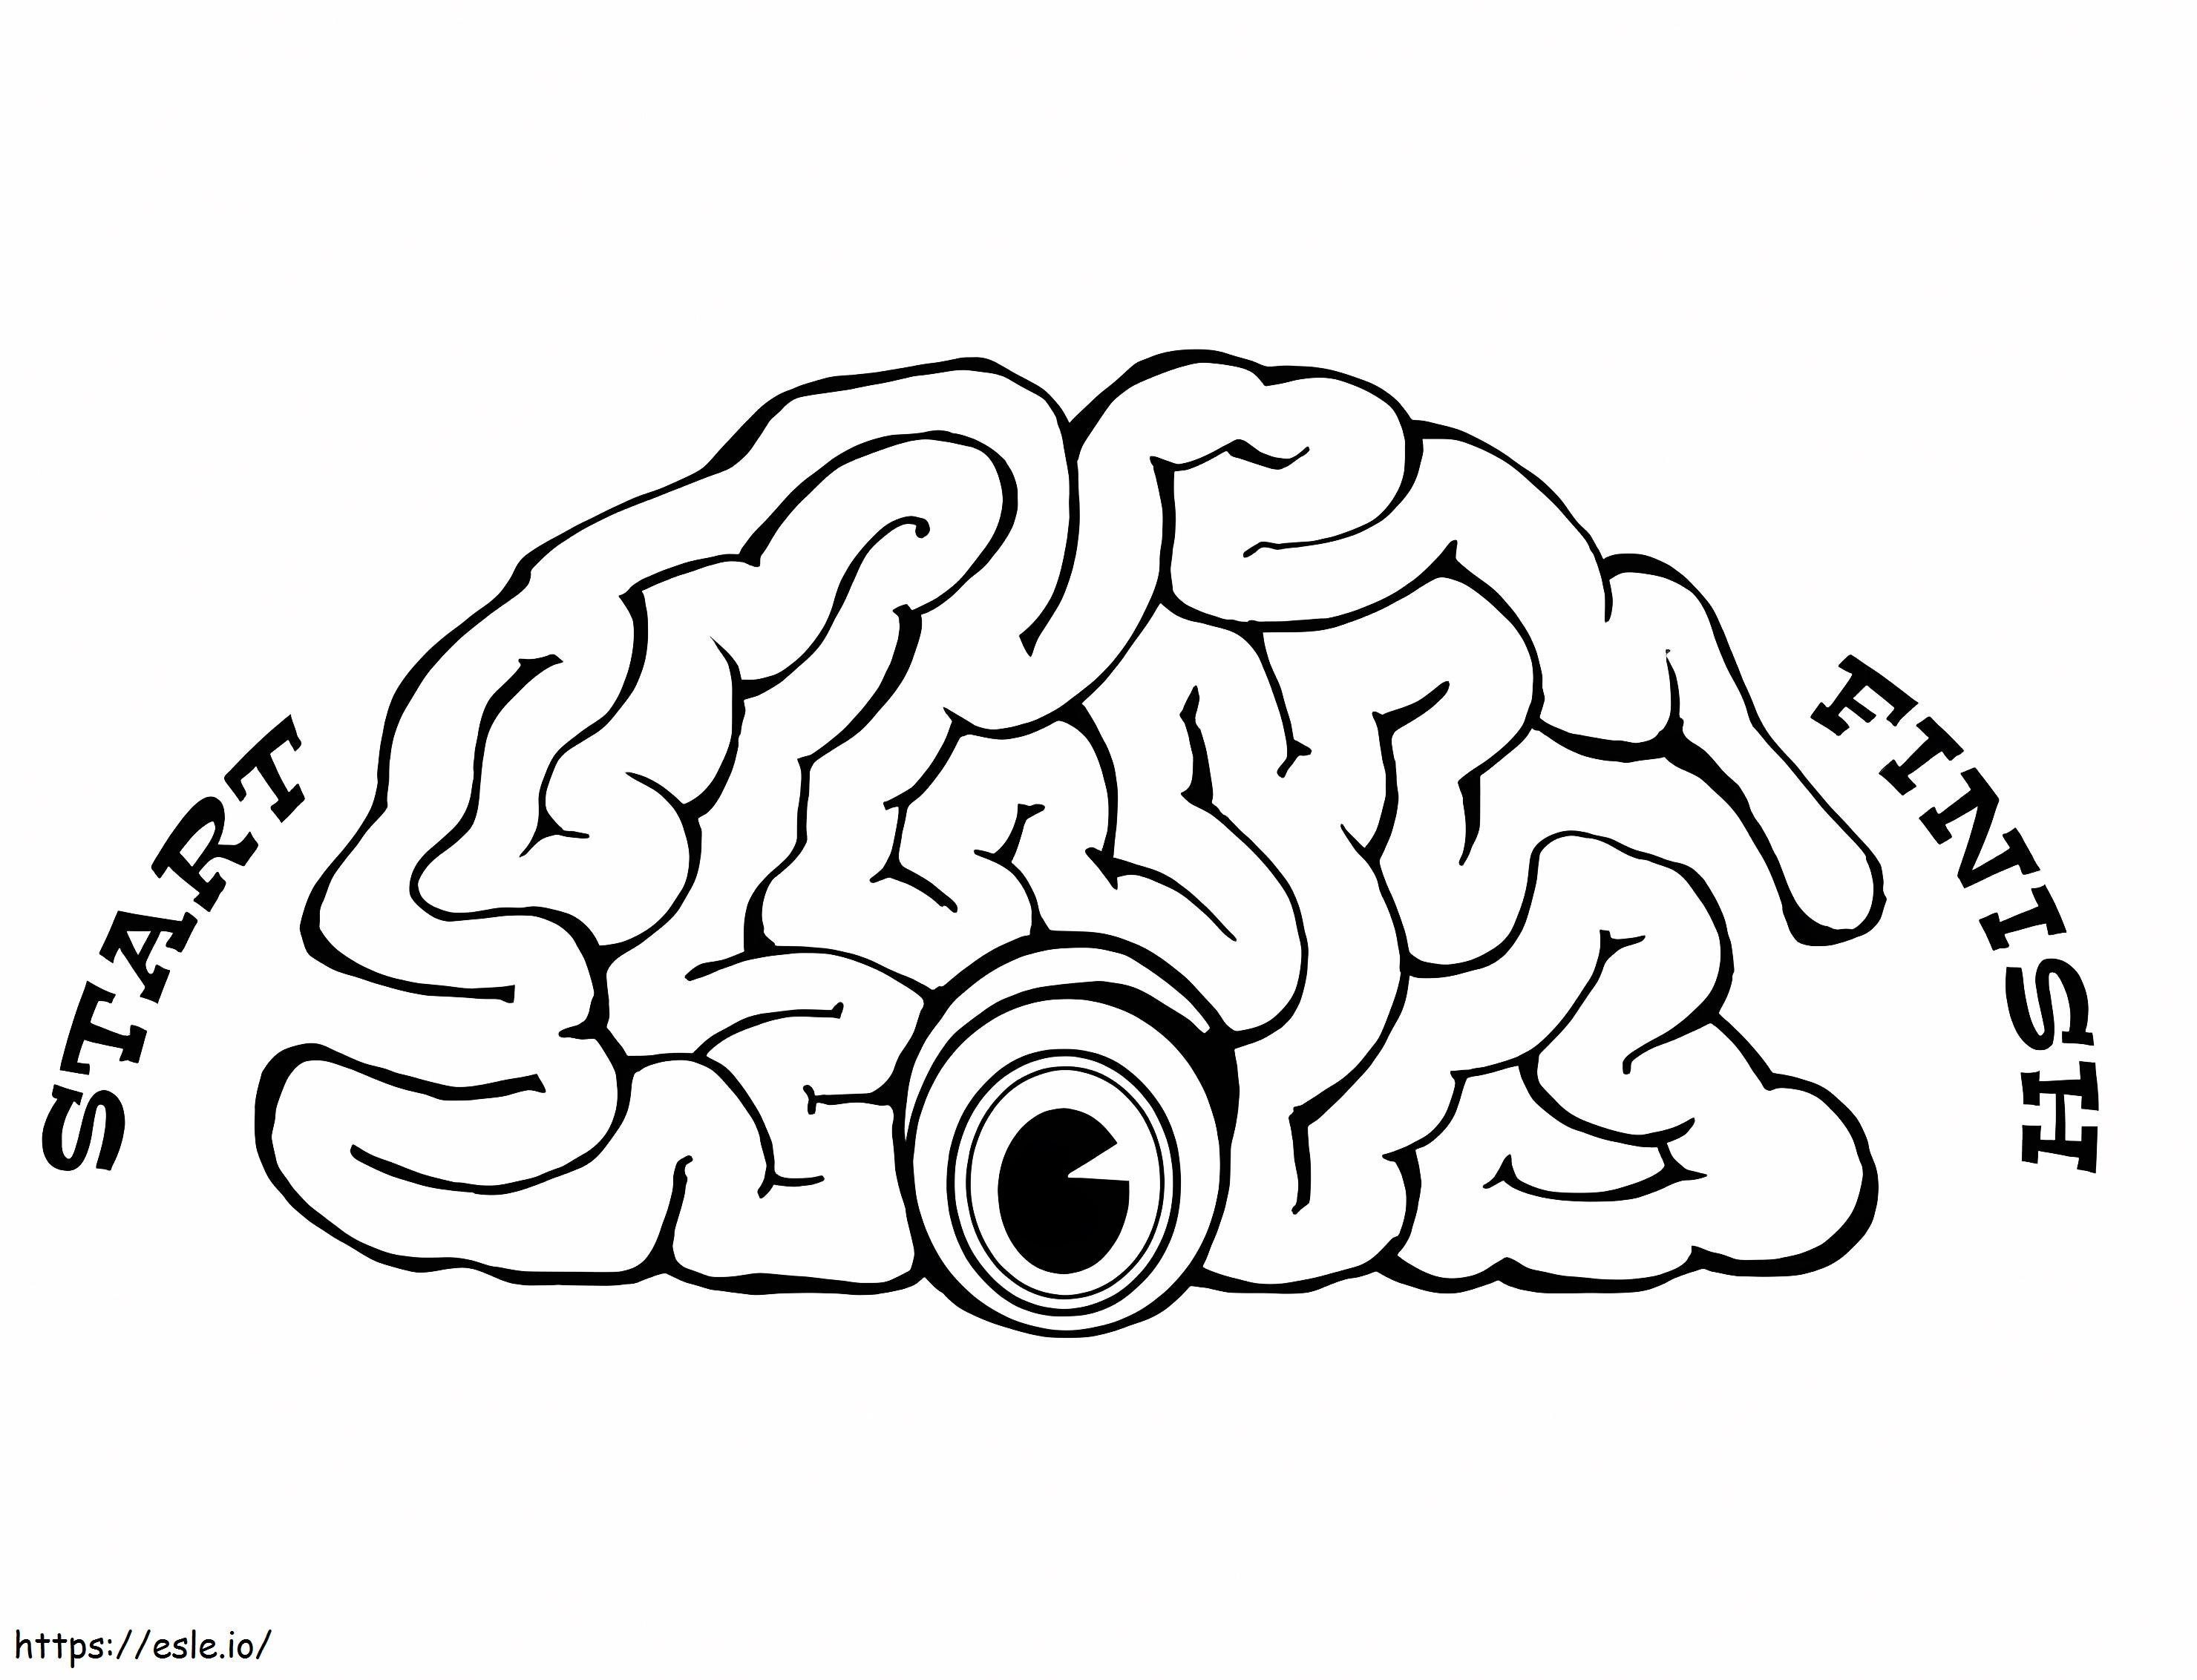 Game Human Brain coloring page